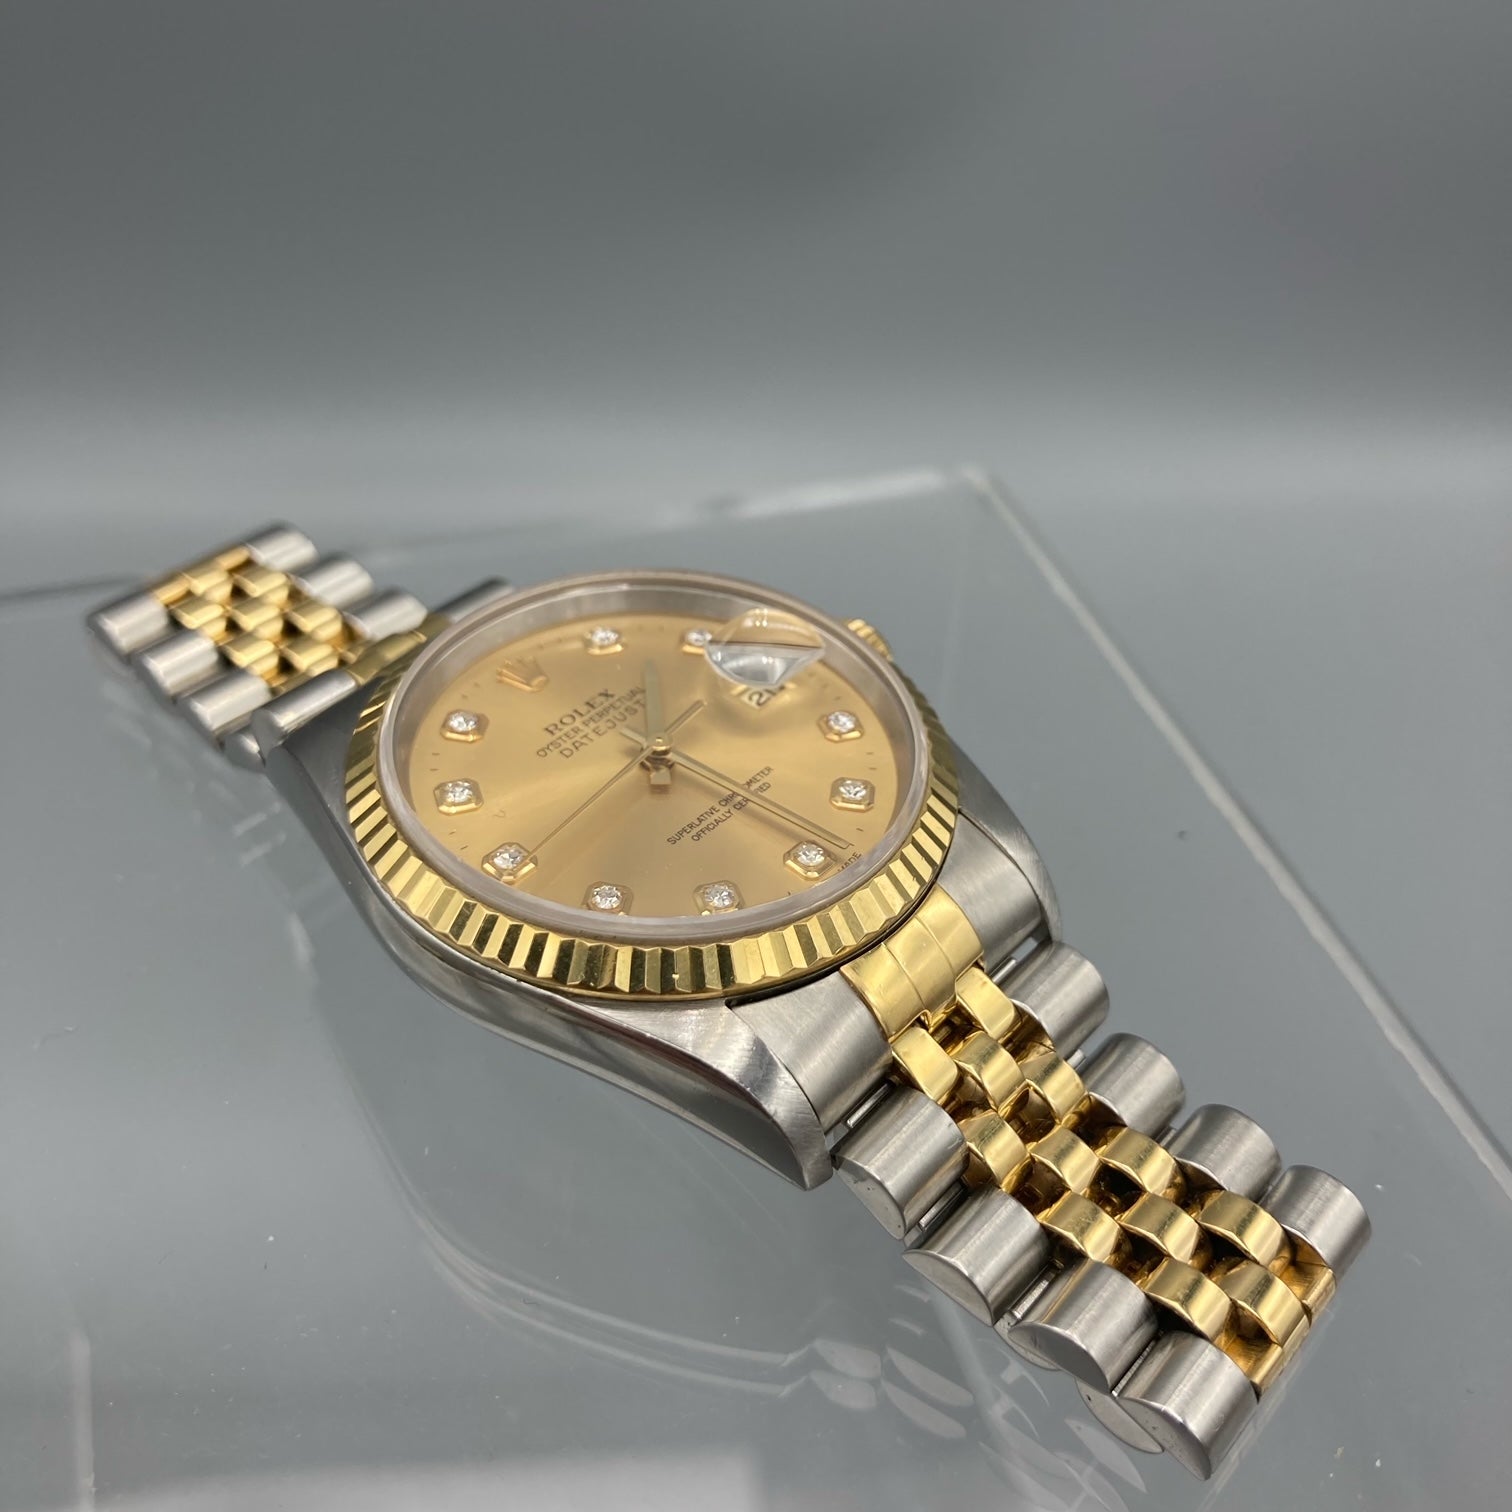 Rolex Datejust 36 Champagne Diamond Dial SS/18kt Solid Gold - 16233